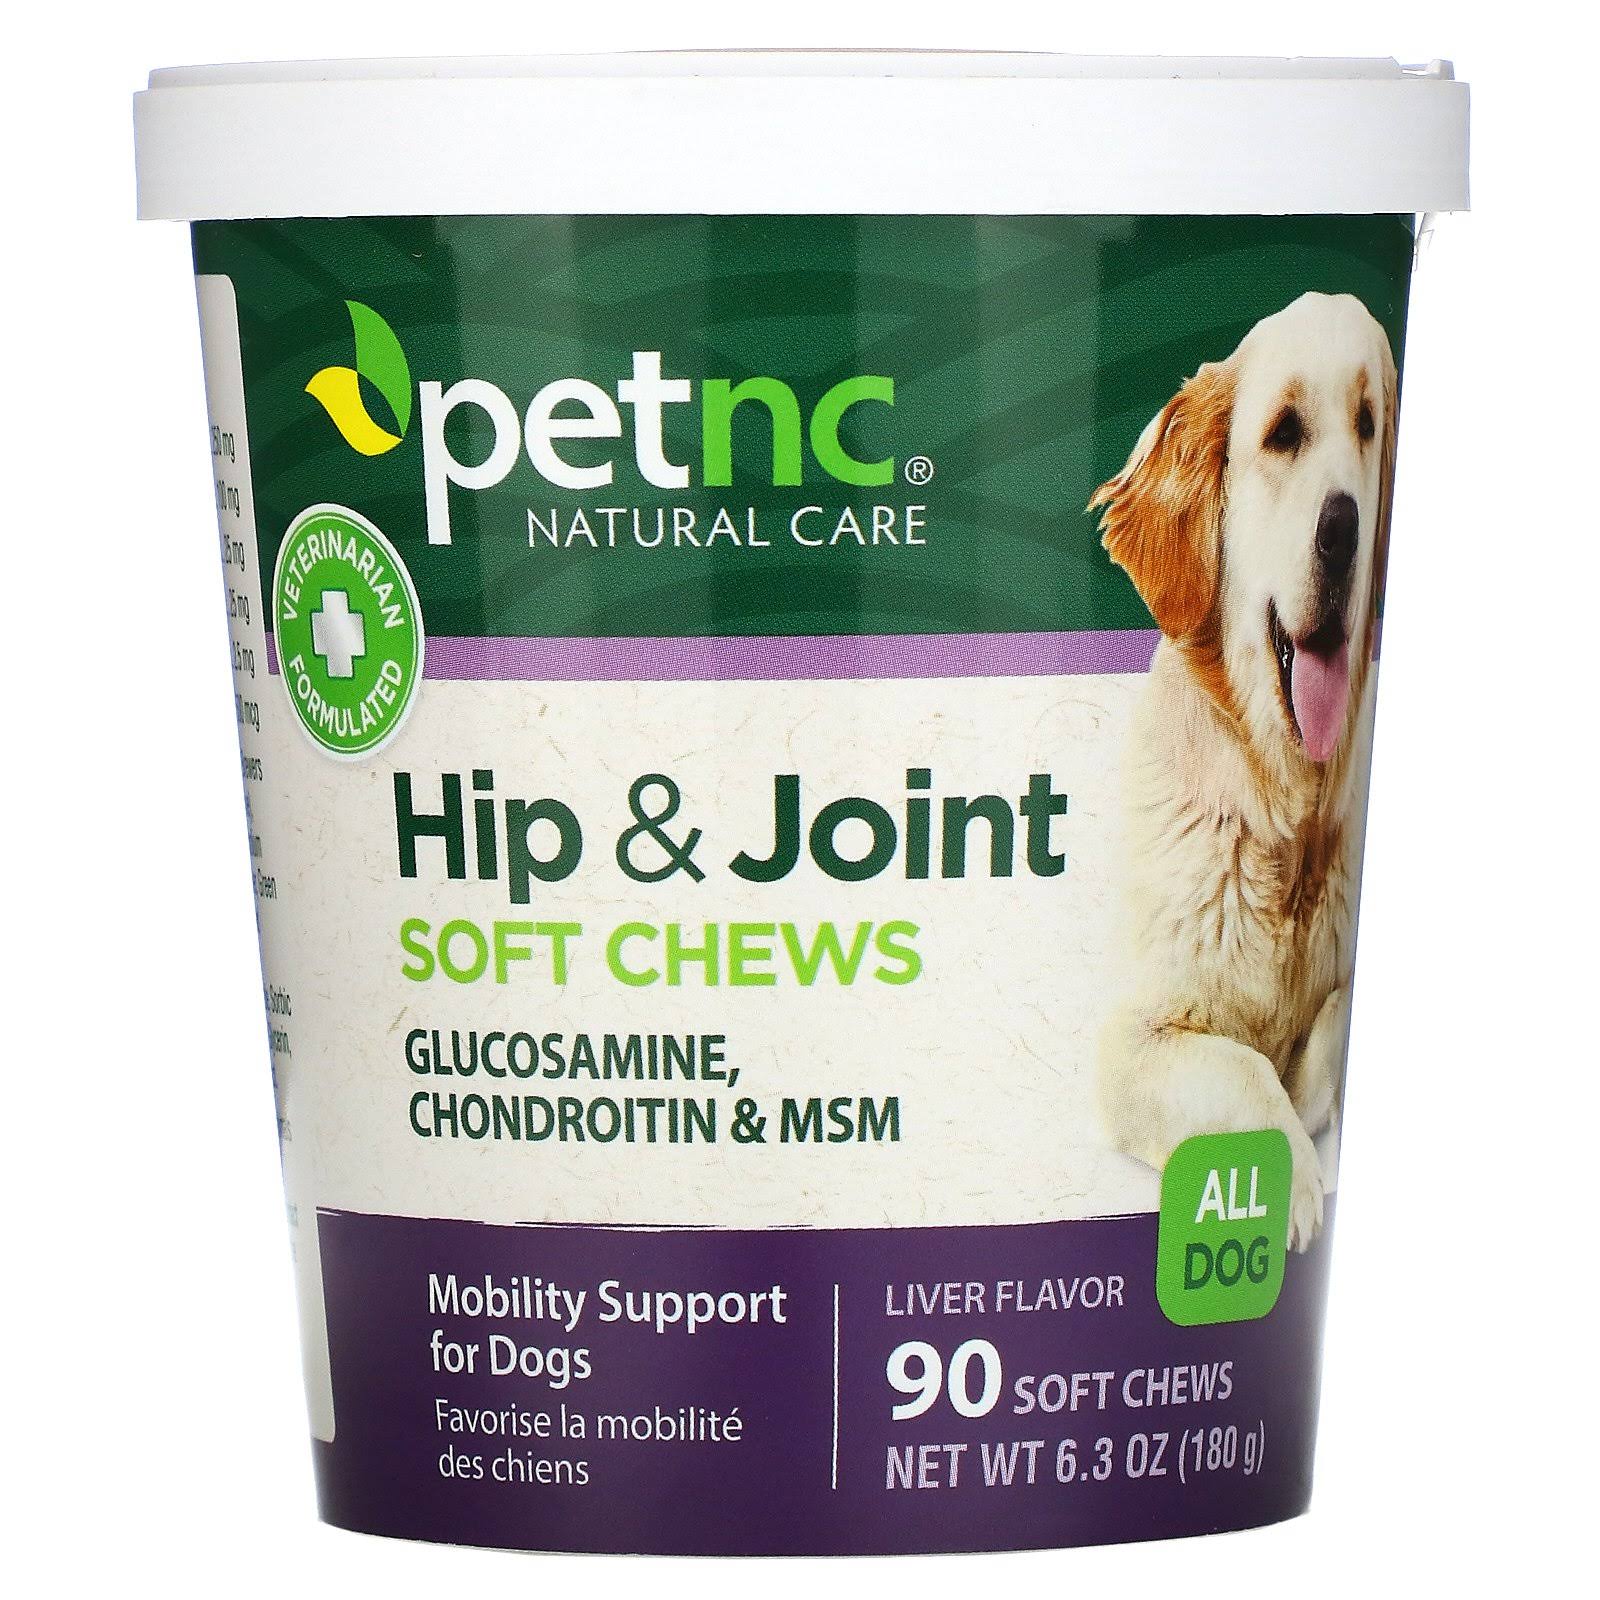 PetNC Natural Care Hip and Joint Dog Chews - 90 Soft Chews